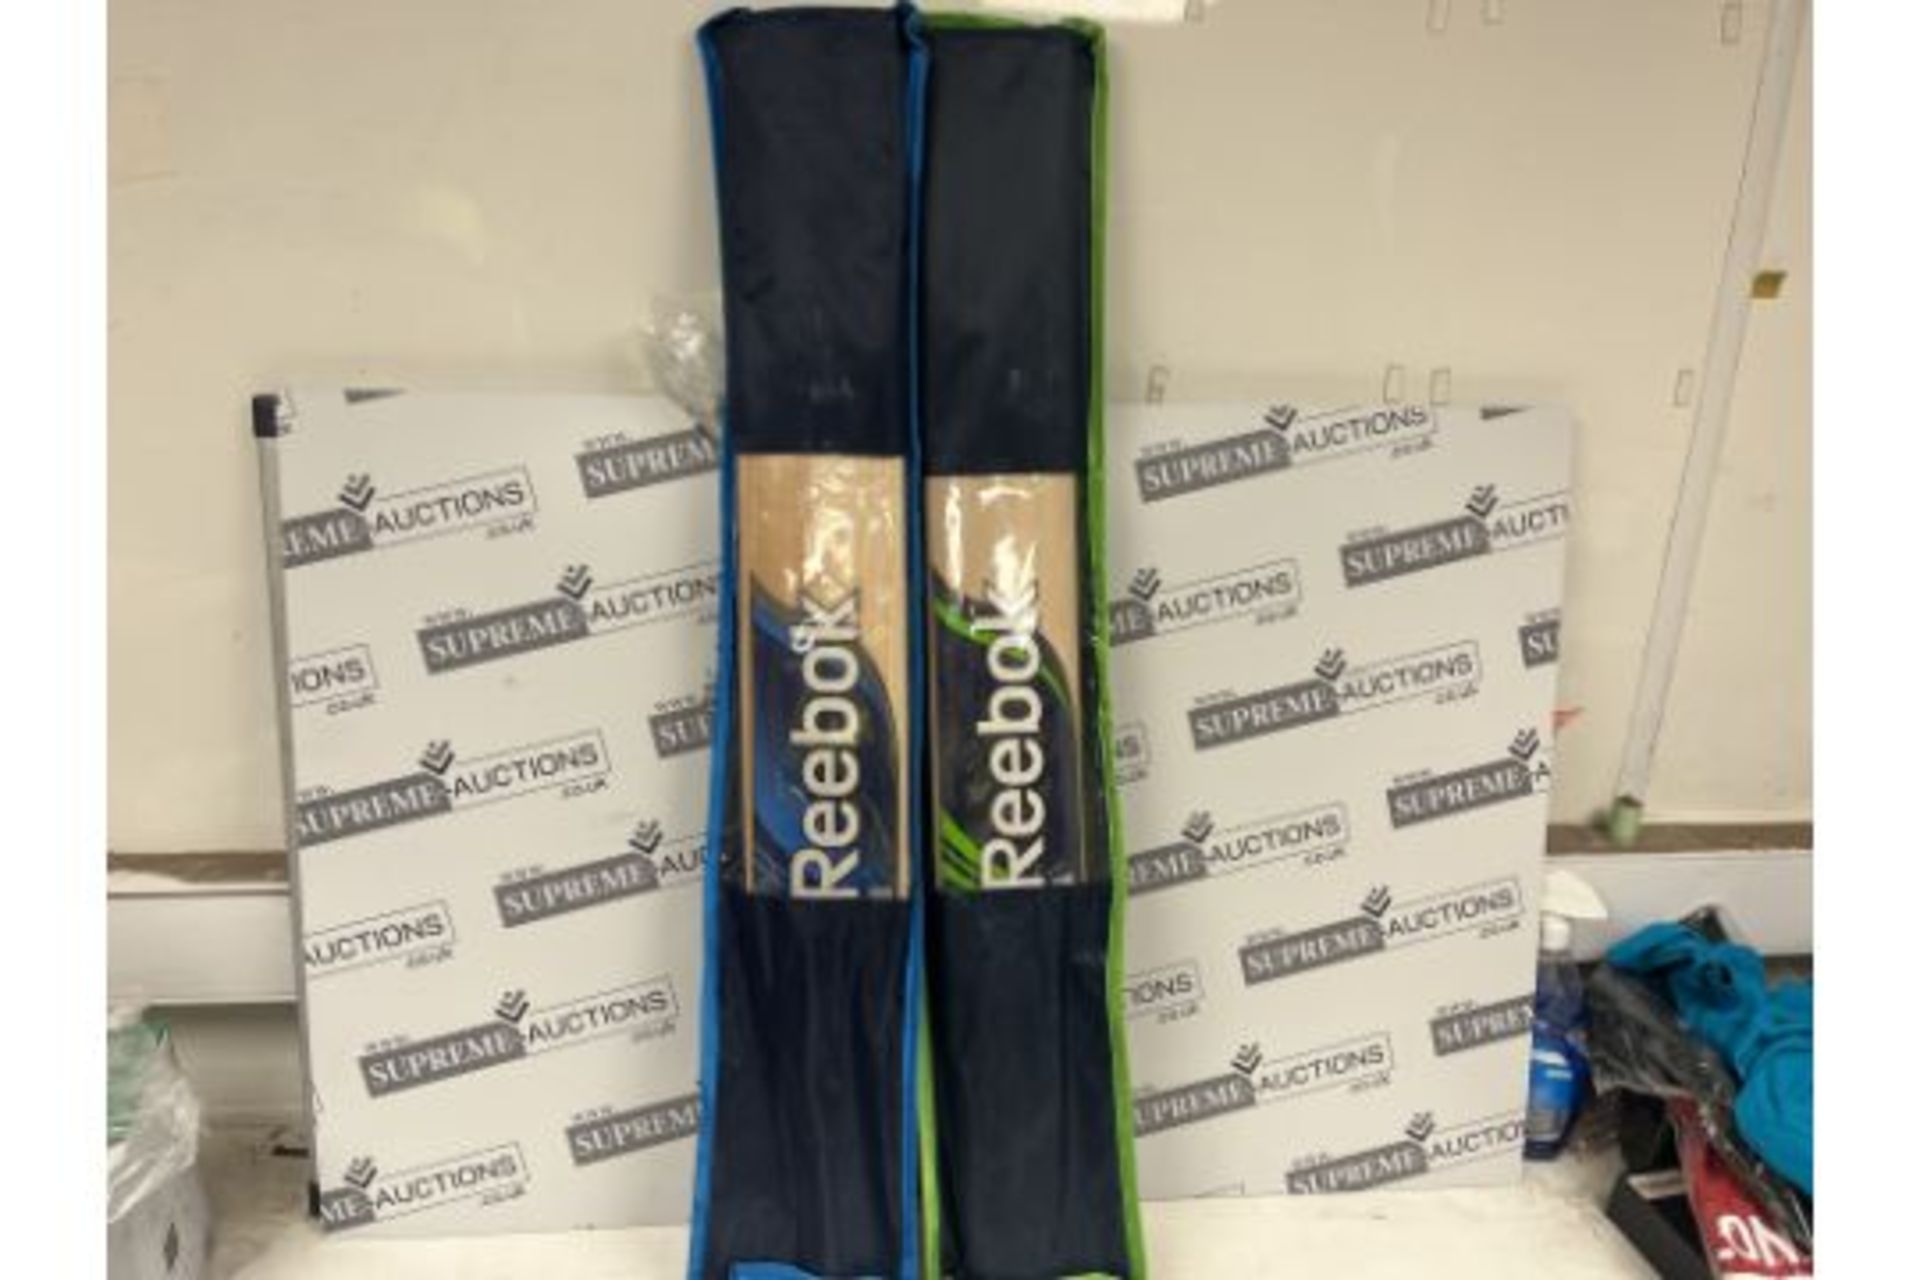 2 X BRAND NEW SHIRT HANDLE REEBOK PROFESSIONAL CRICKET BATS WITH COVERS AM7